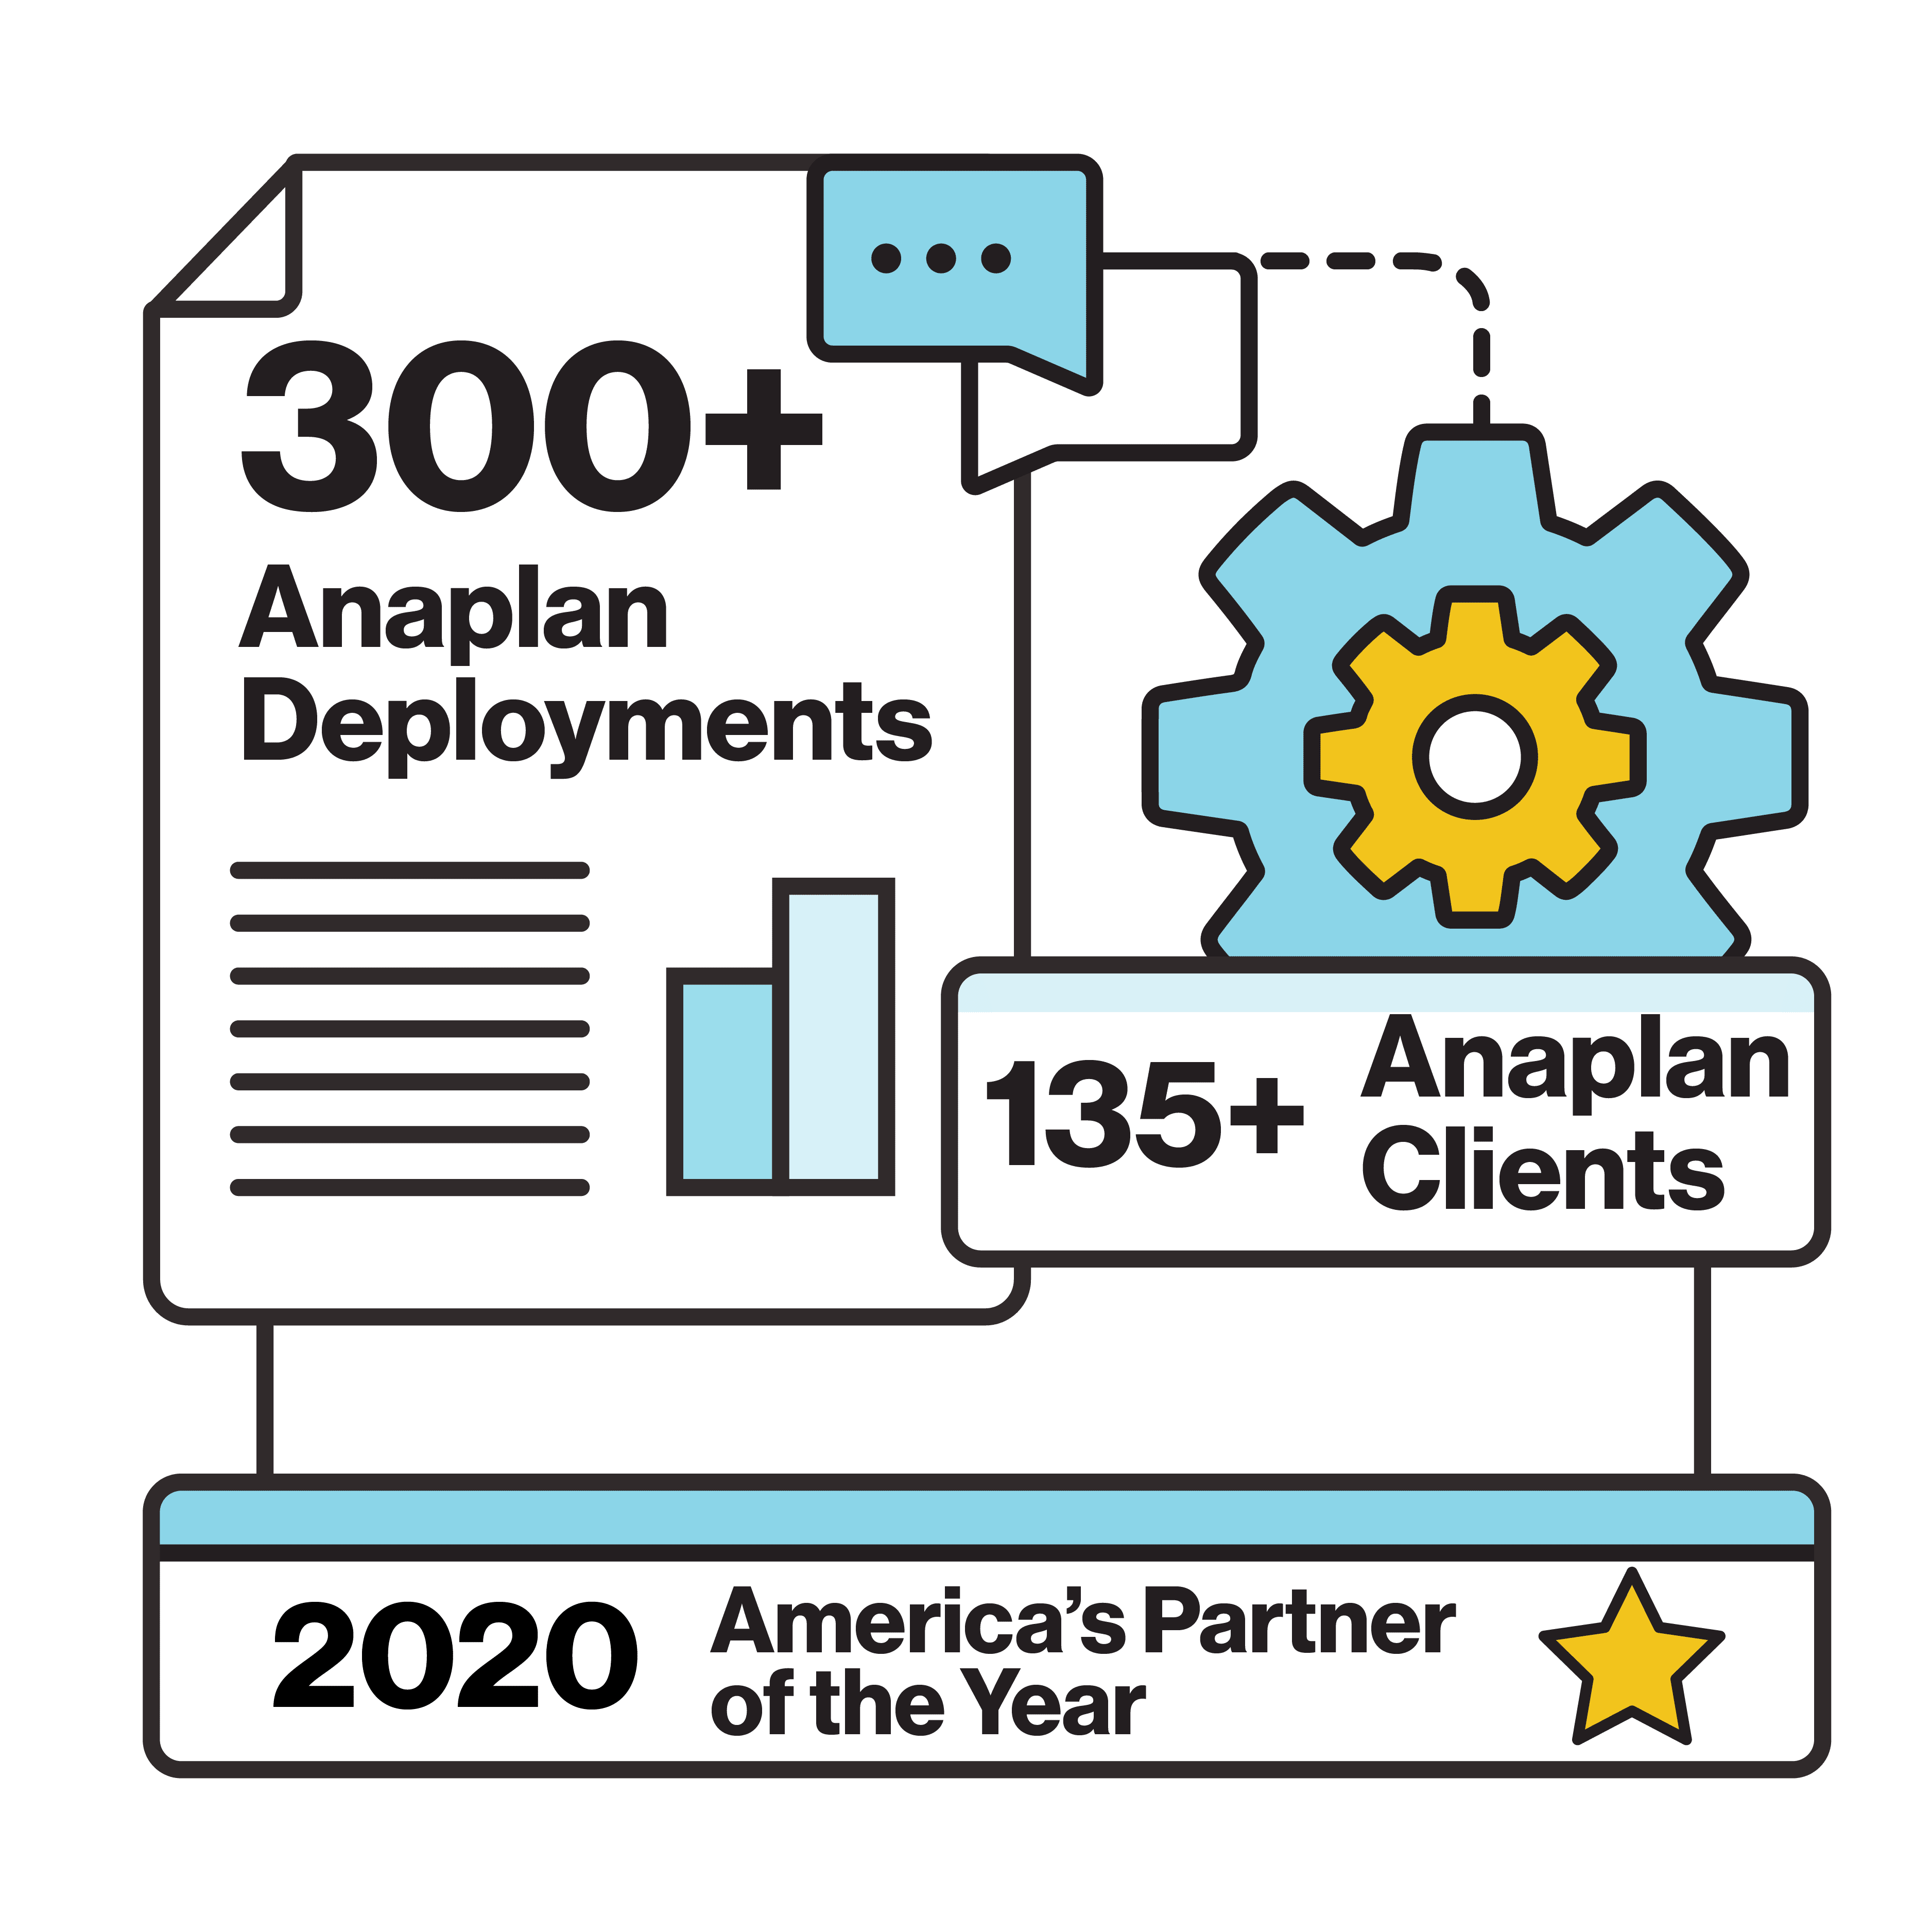 300+ Anaplan Deployments, 135+Anaplan Clients, 2020 America's Partner of the Year